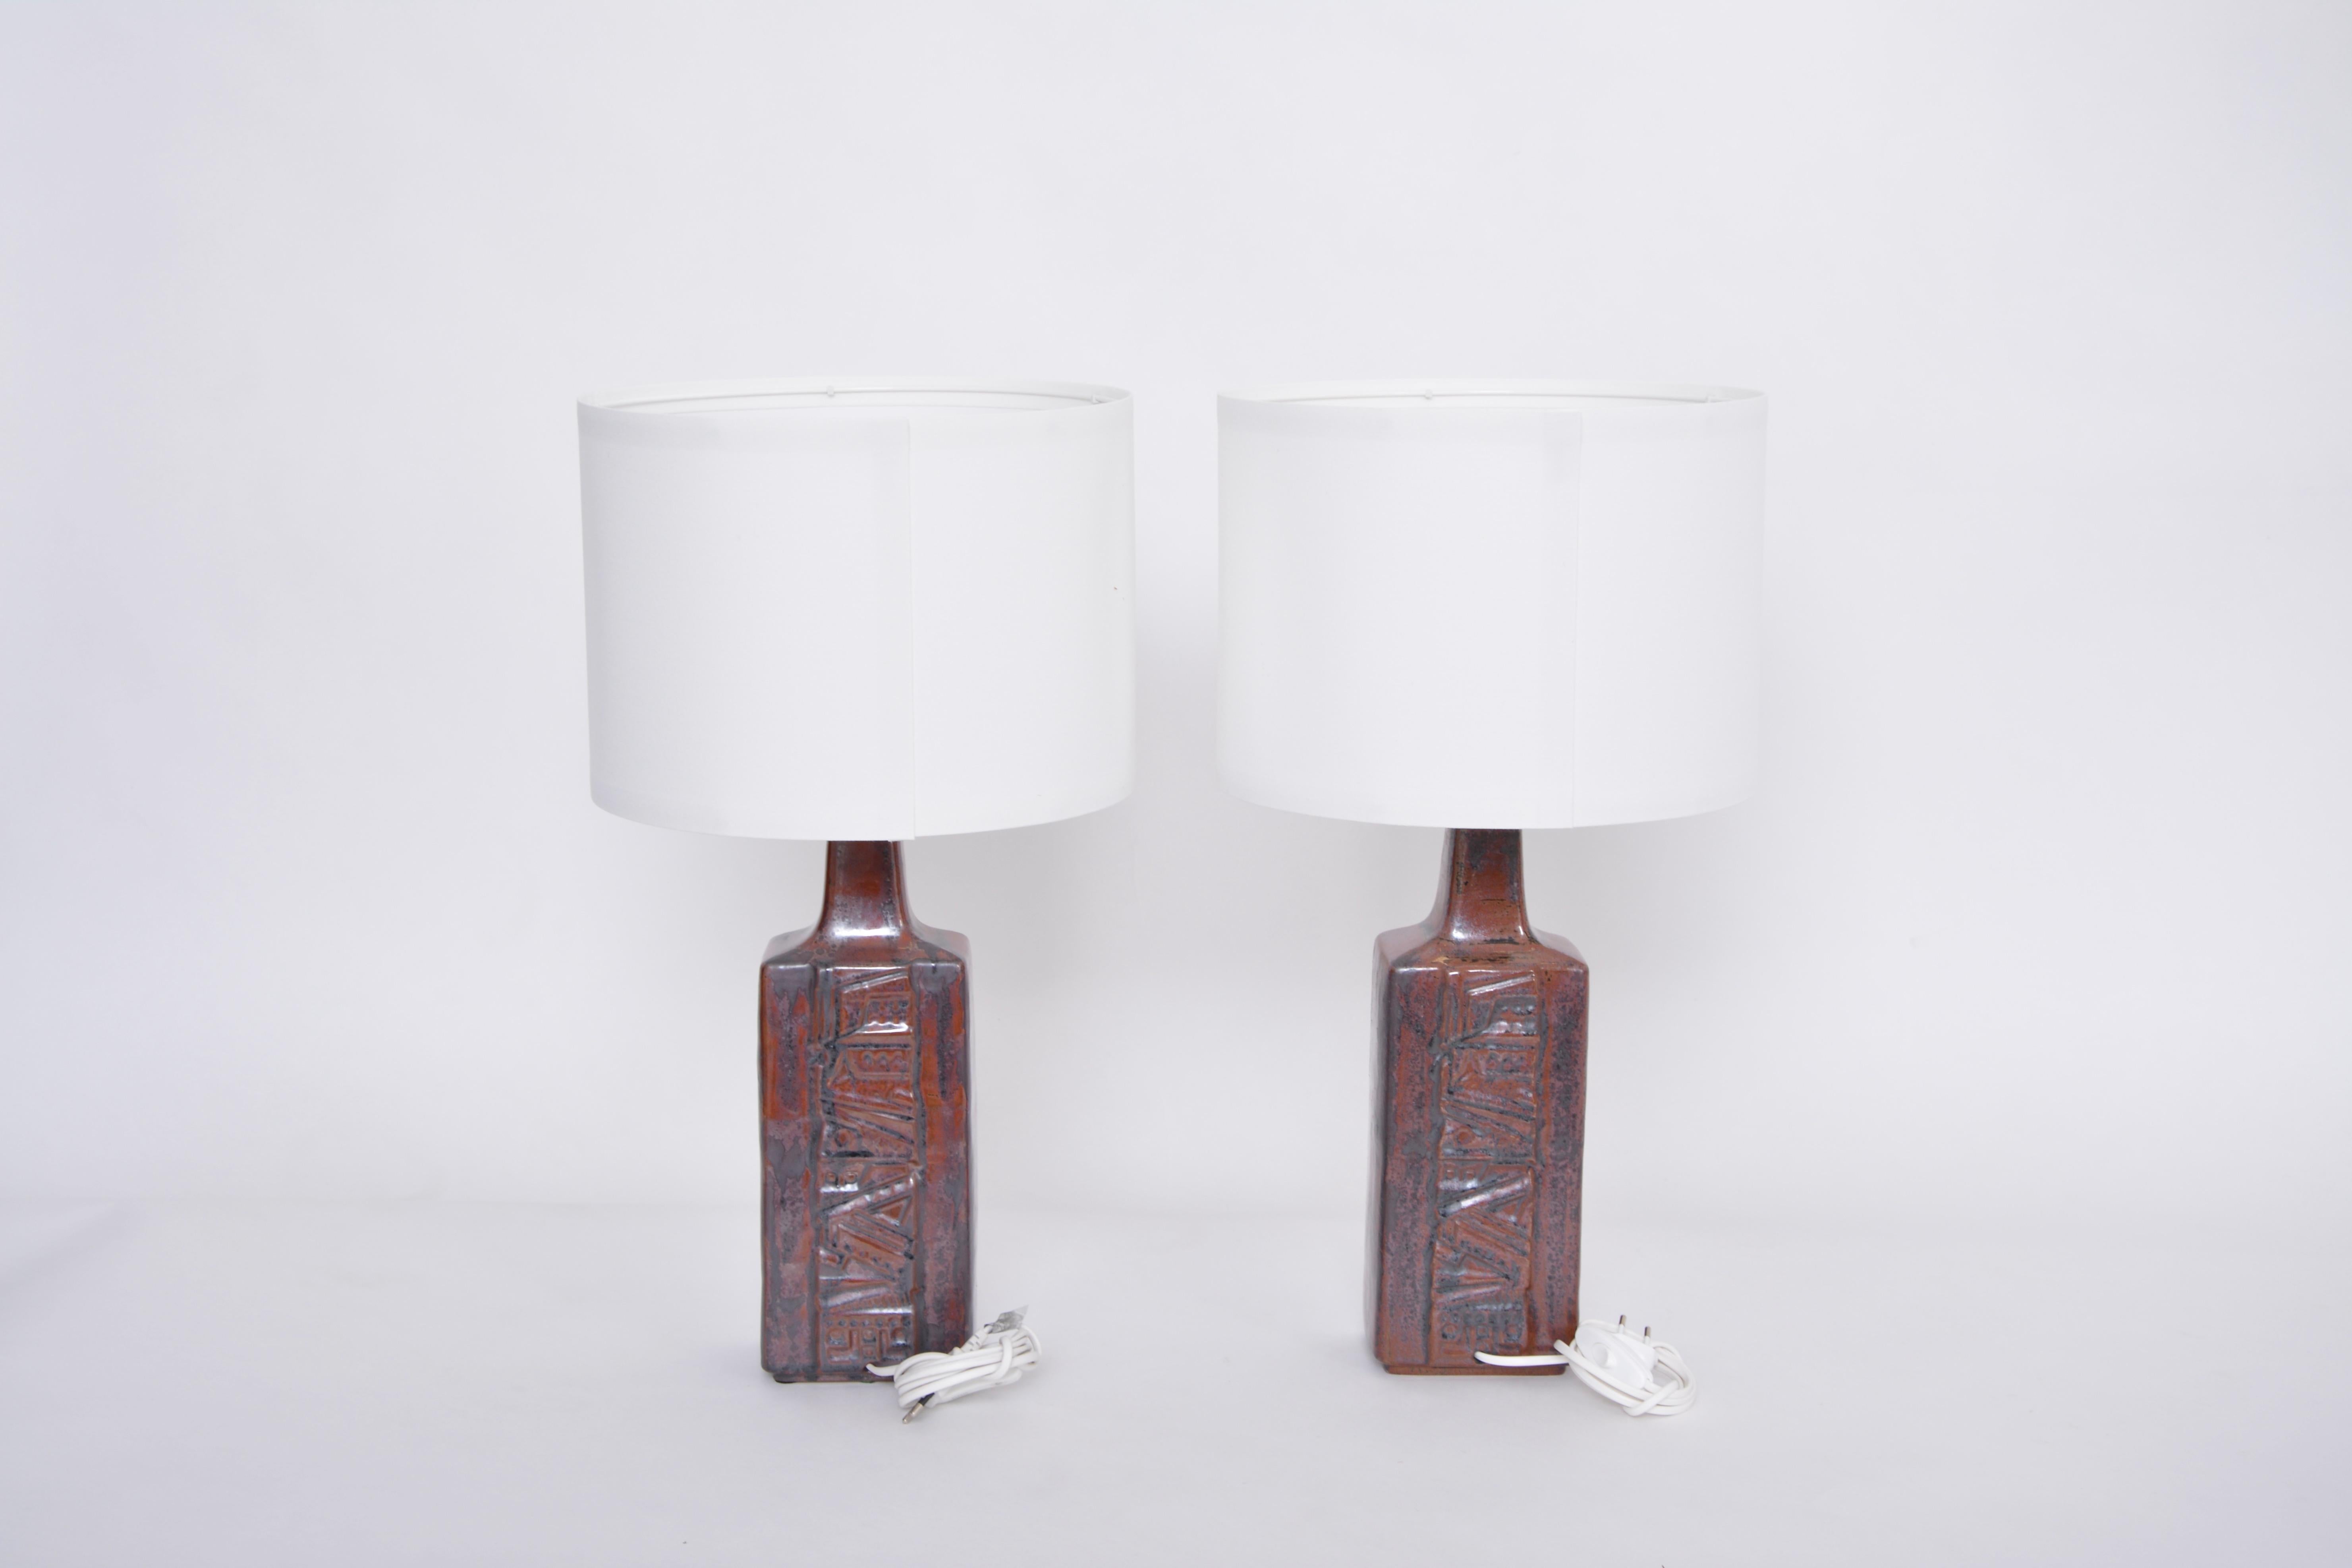 Pair of Danish Mid-Century Modern Ceramic Table Lamps by Desiree Stentoj In Good Condition For Sale In Berlin, DE